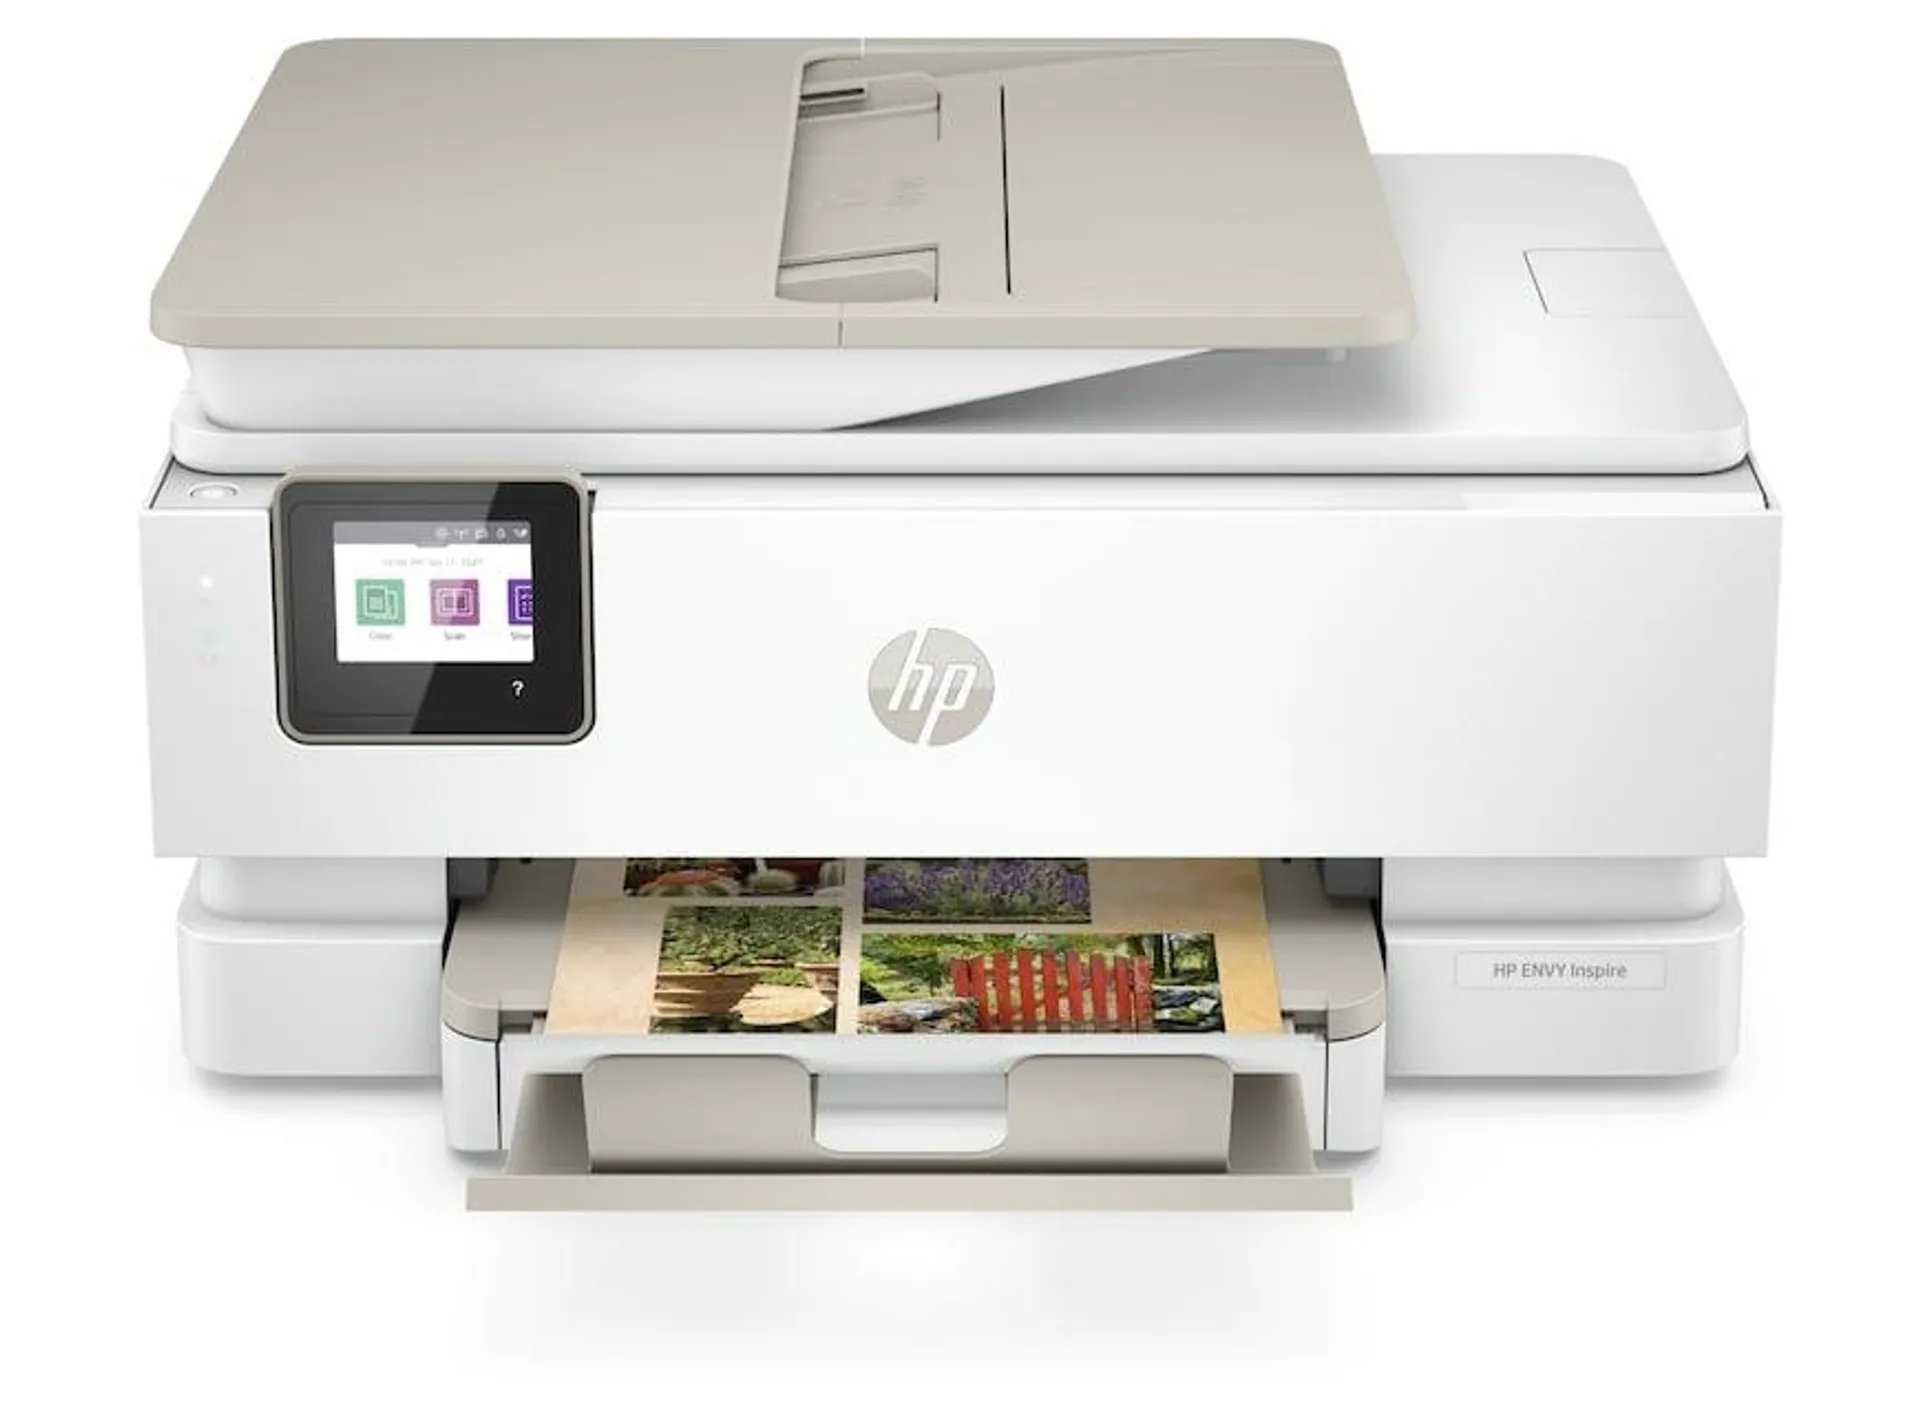 HP ENVY Inspire 7920e All-in-One HP+ Wireless Colour Printer with 6 months Instant Ink